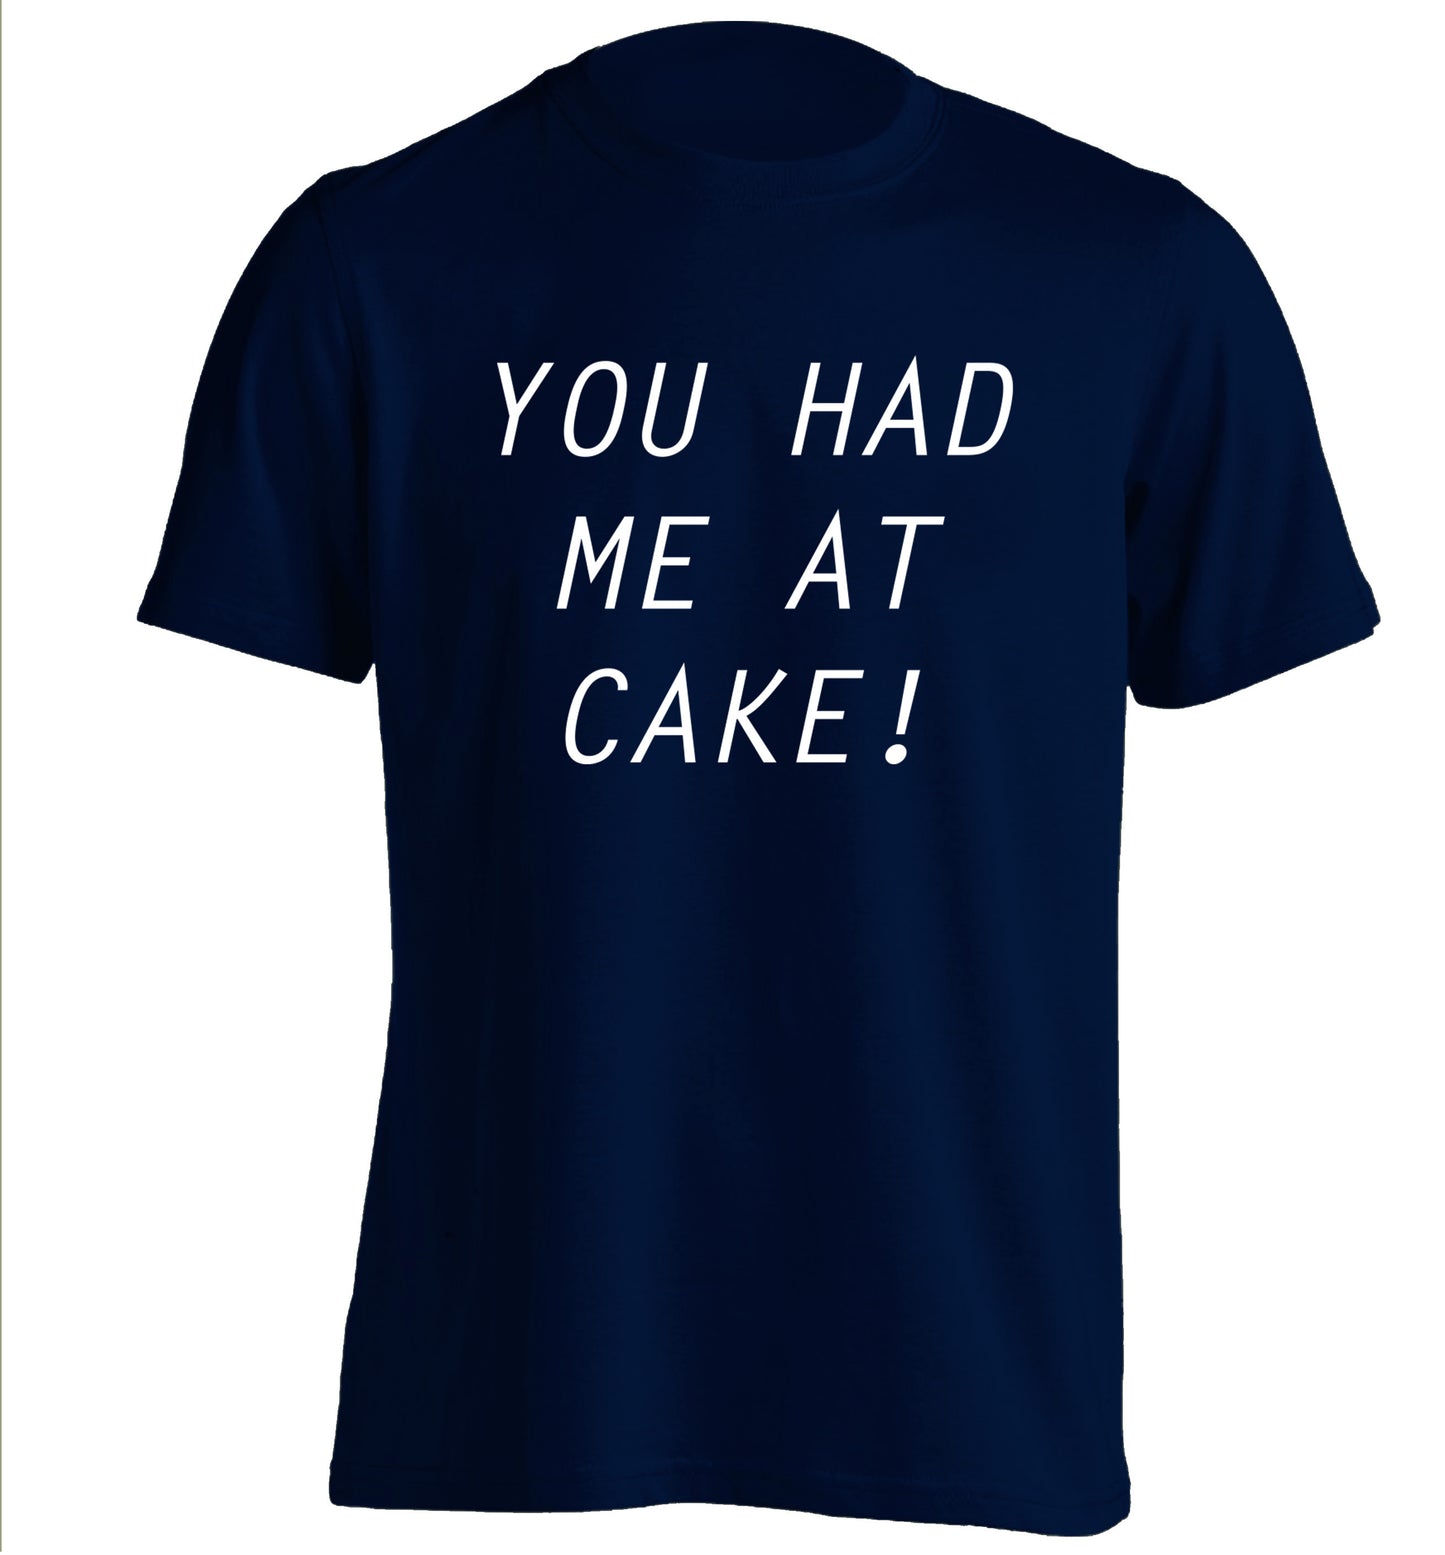 You had me at cake adults unisex navy Tshirt 2XL